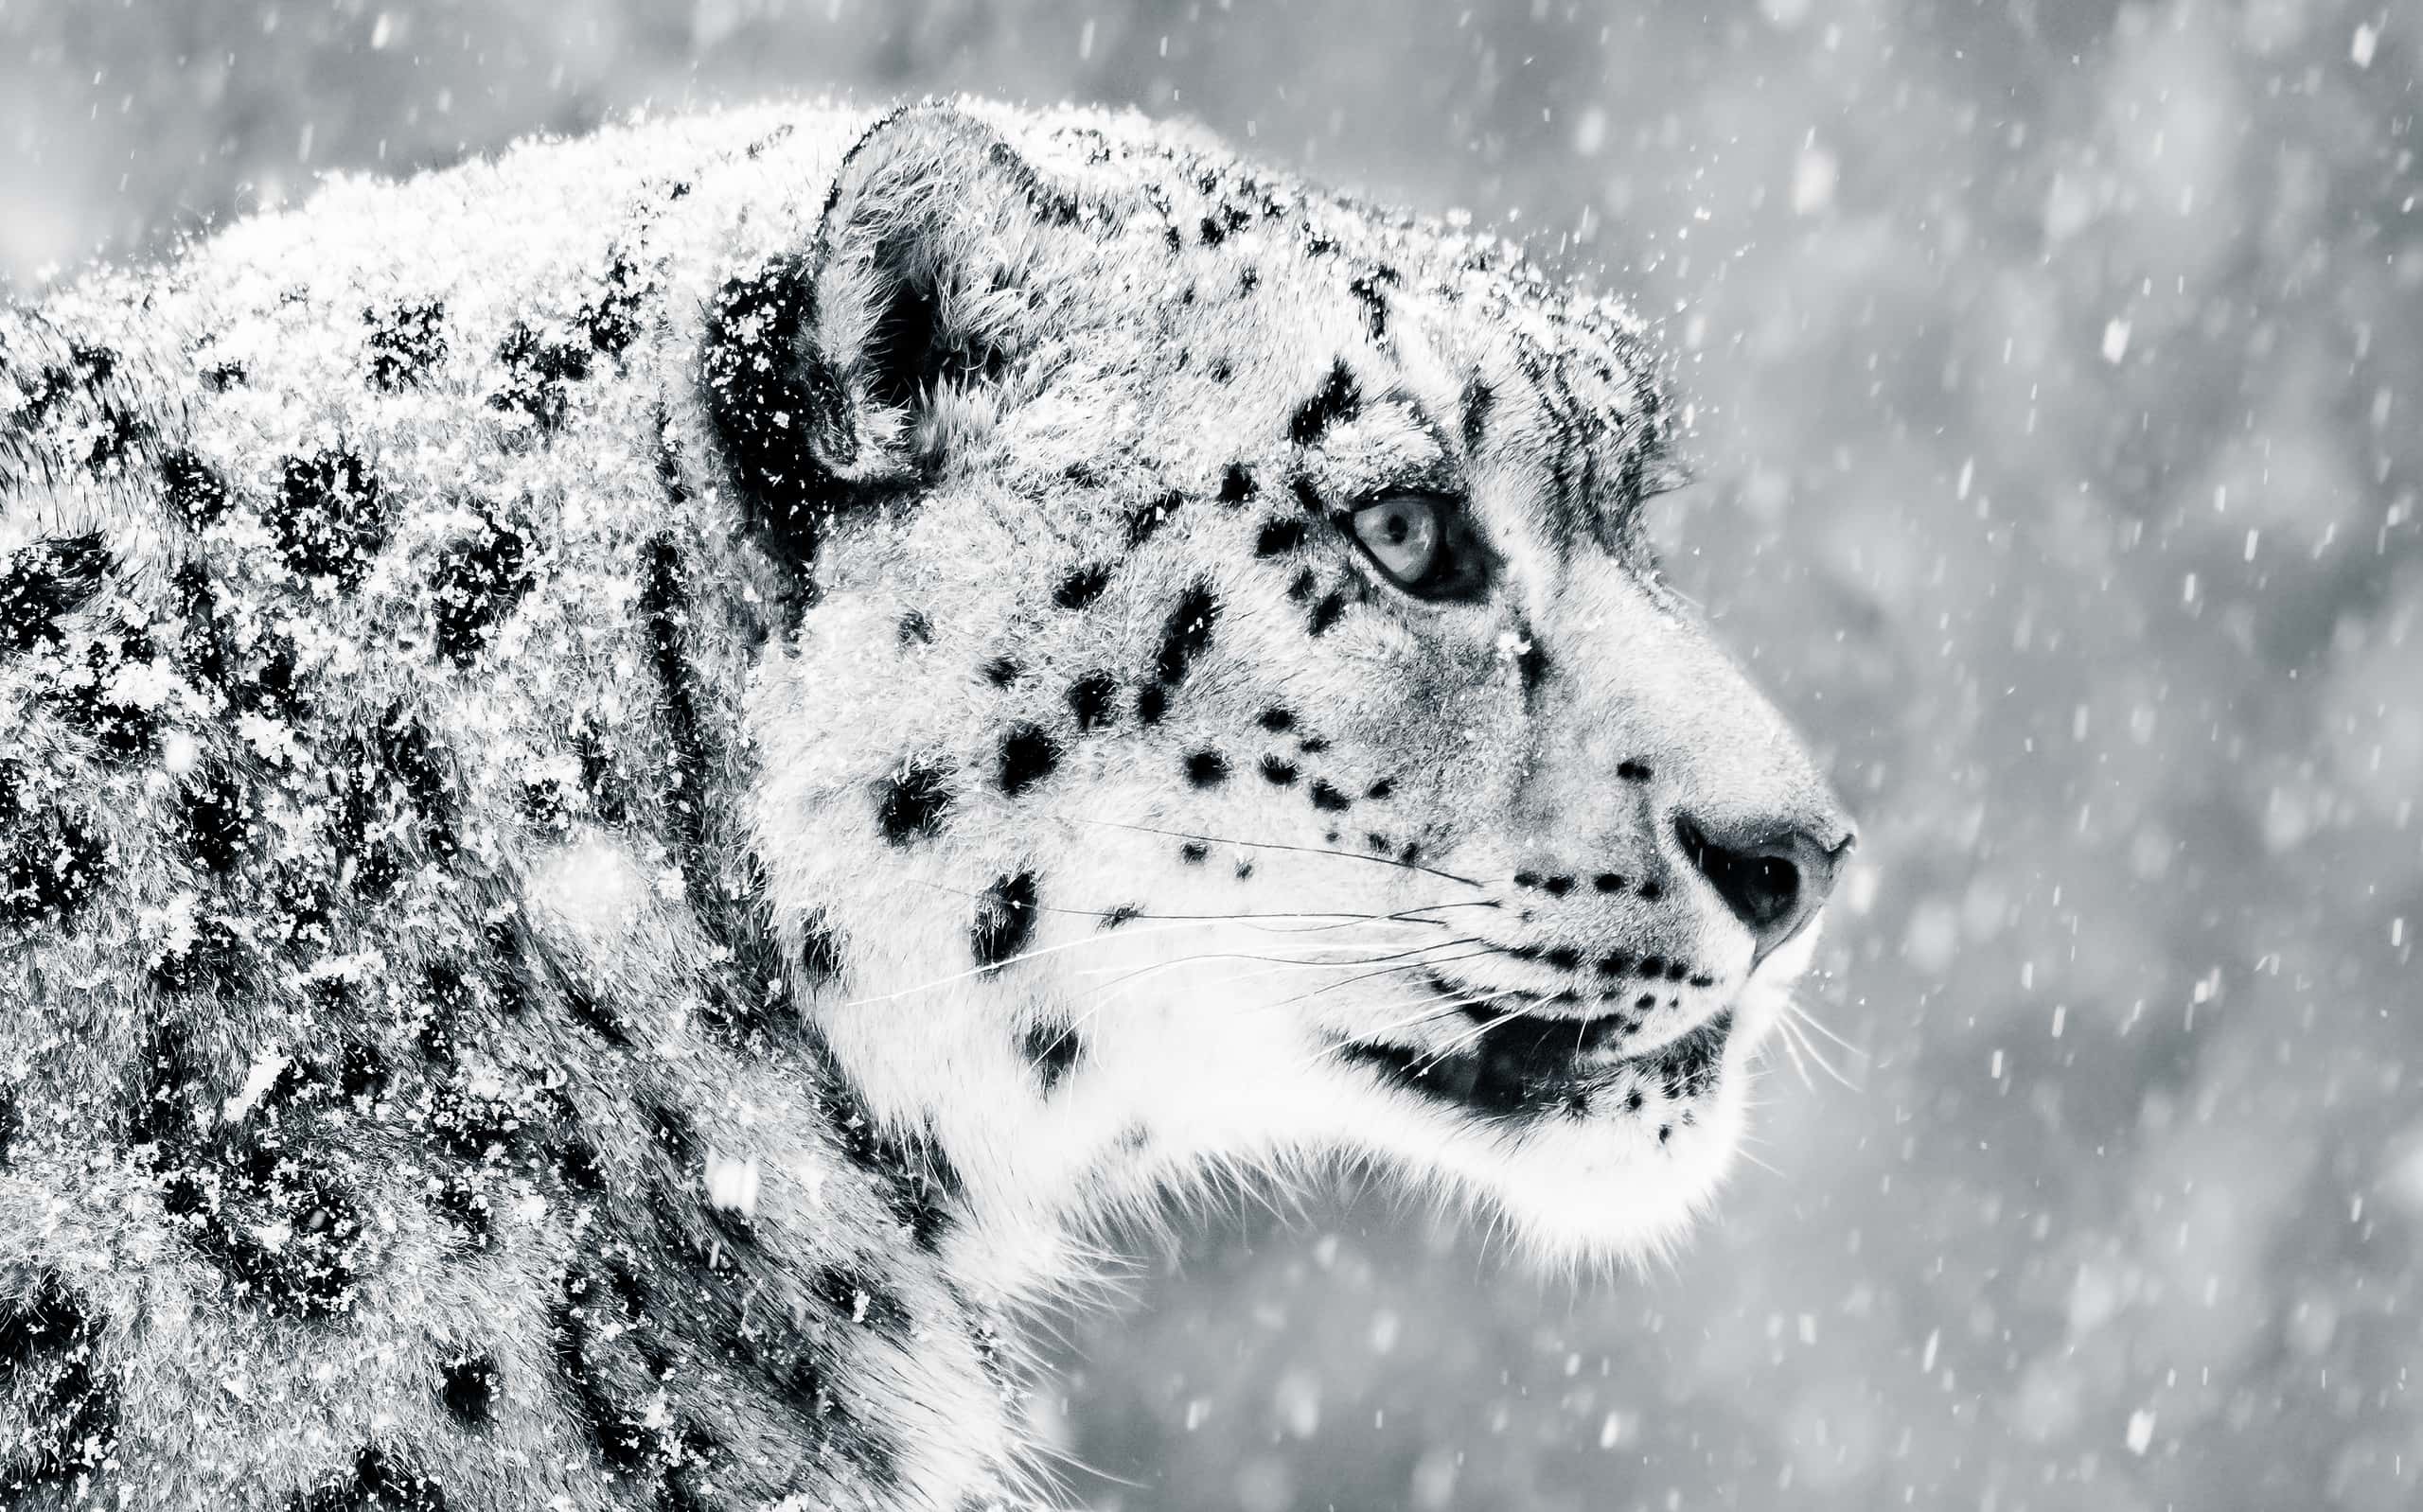 Snow Leopard in Snow Storm V